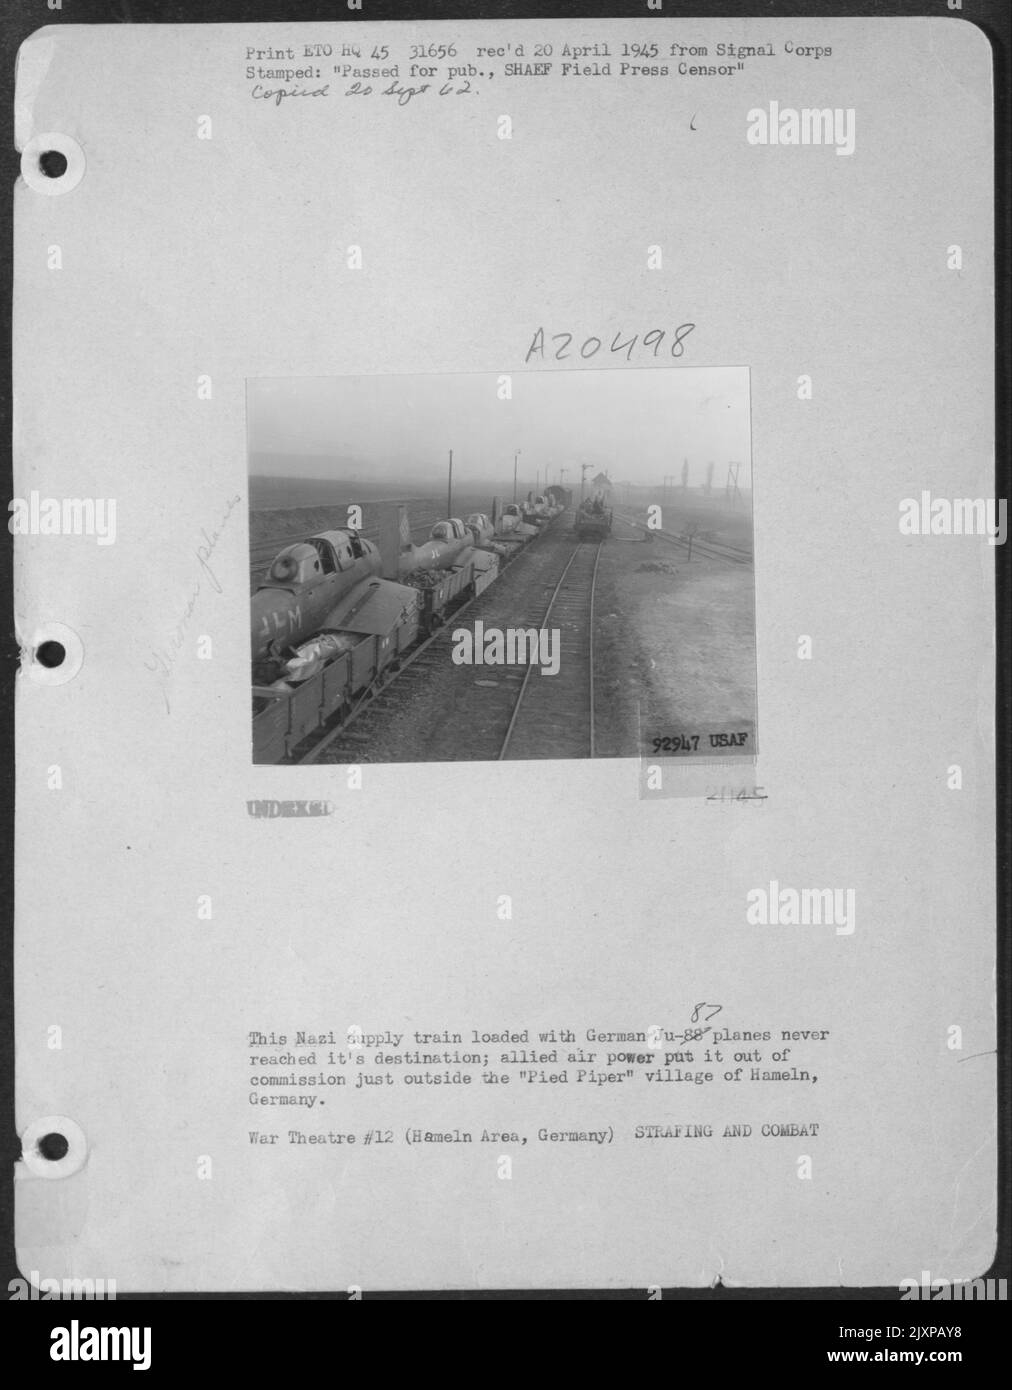 This Nazi Supply Train Loaded With German Ju-87 Planes Never Reached Its Destination; Allied Air Power Put It Out Of Commission Just Outside 'Pied Piper' Village Of Hameln, Germany. Stock Photo